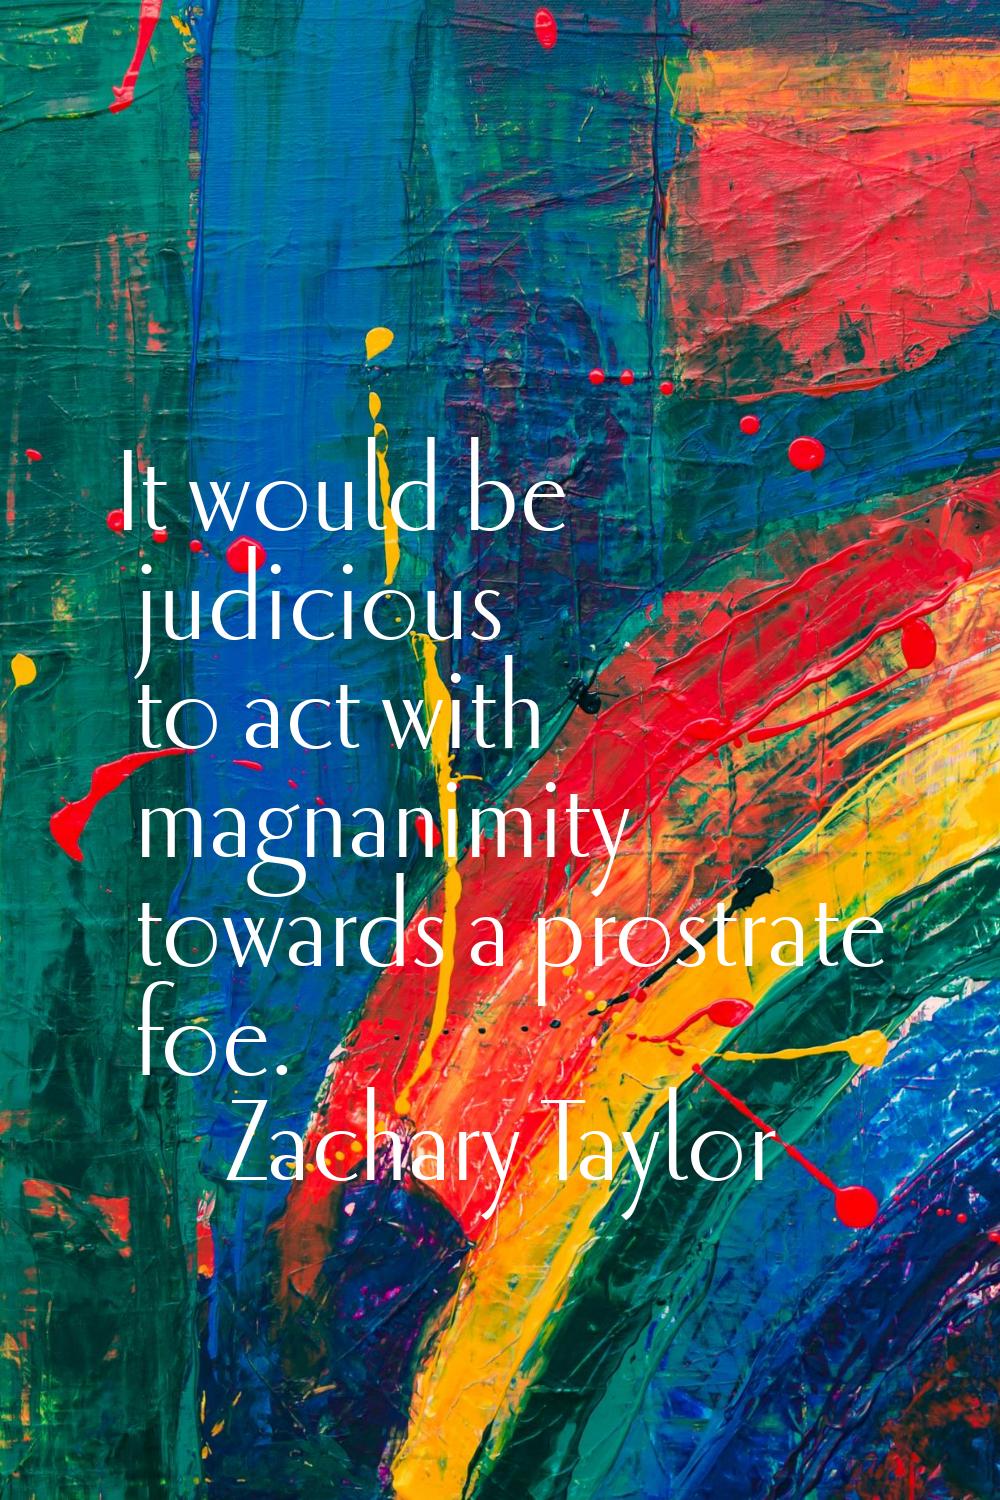 It would be judicious to act with magnanimity towards a prostrate foe.